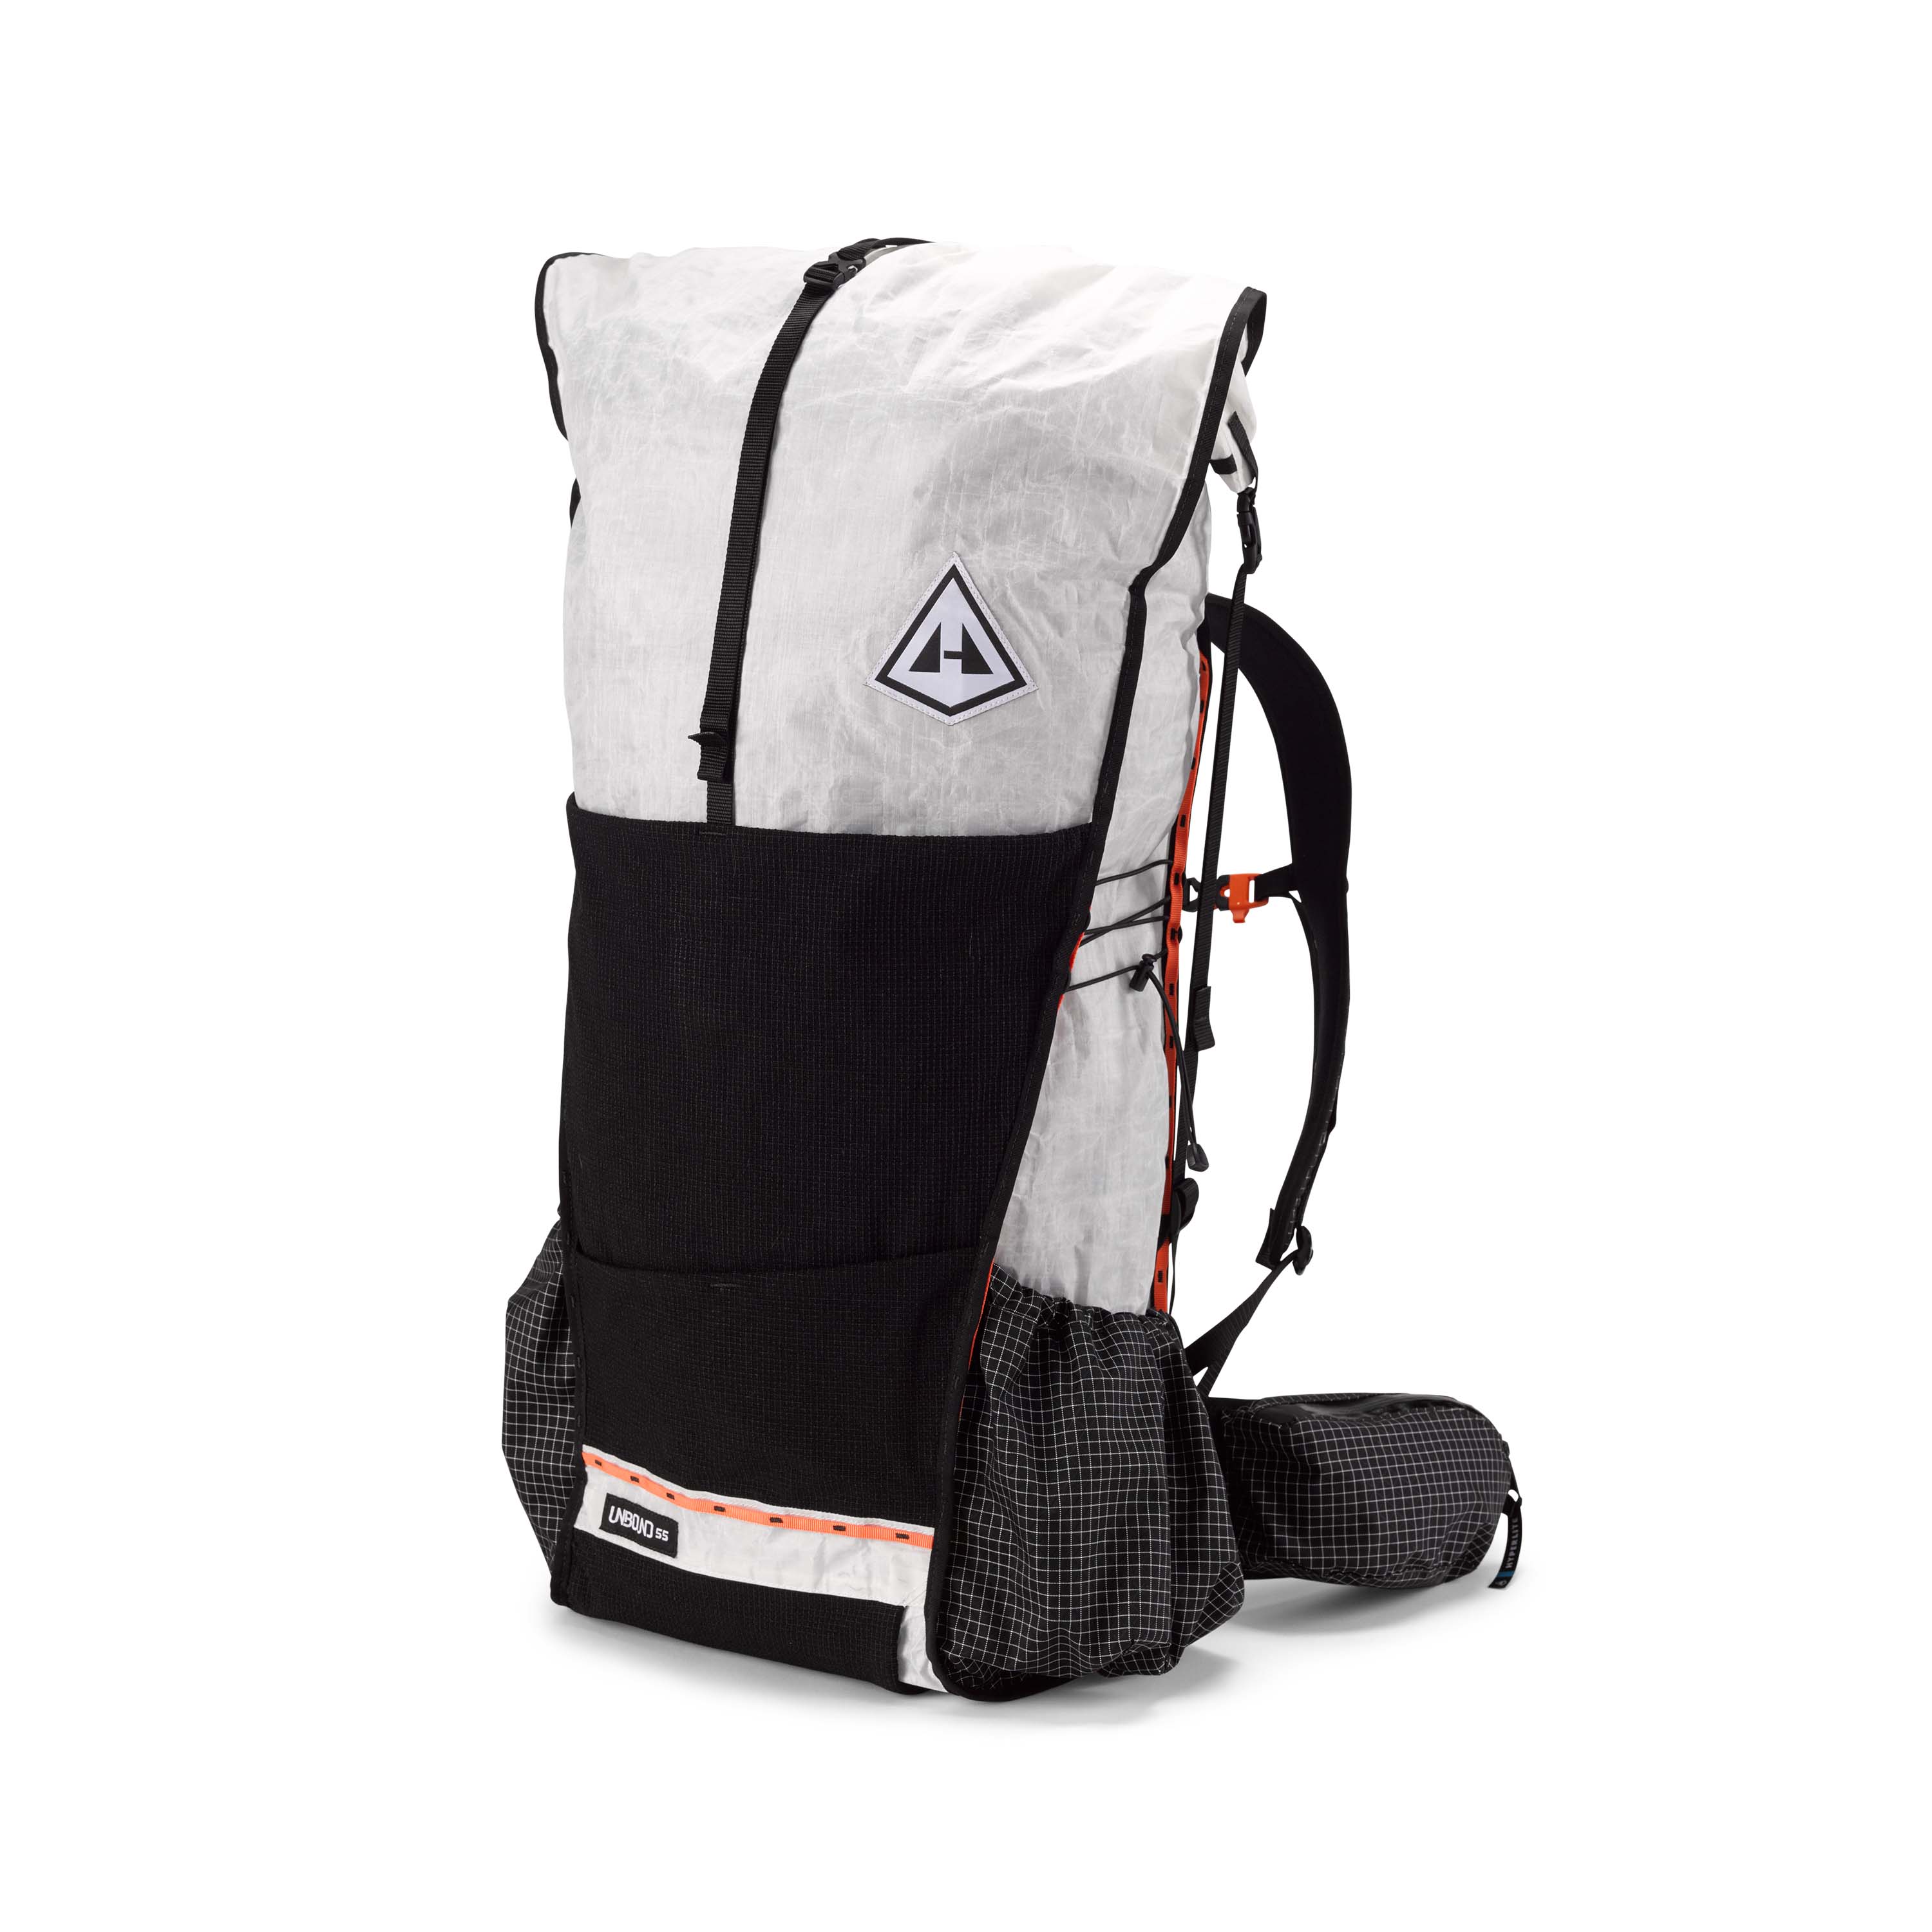 A white backpack with black and orange straps.